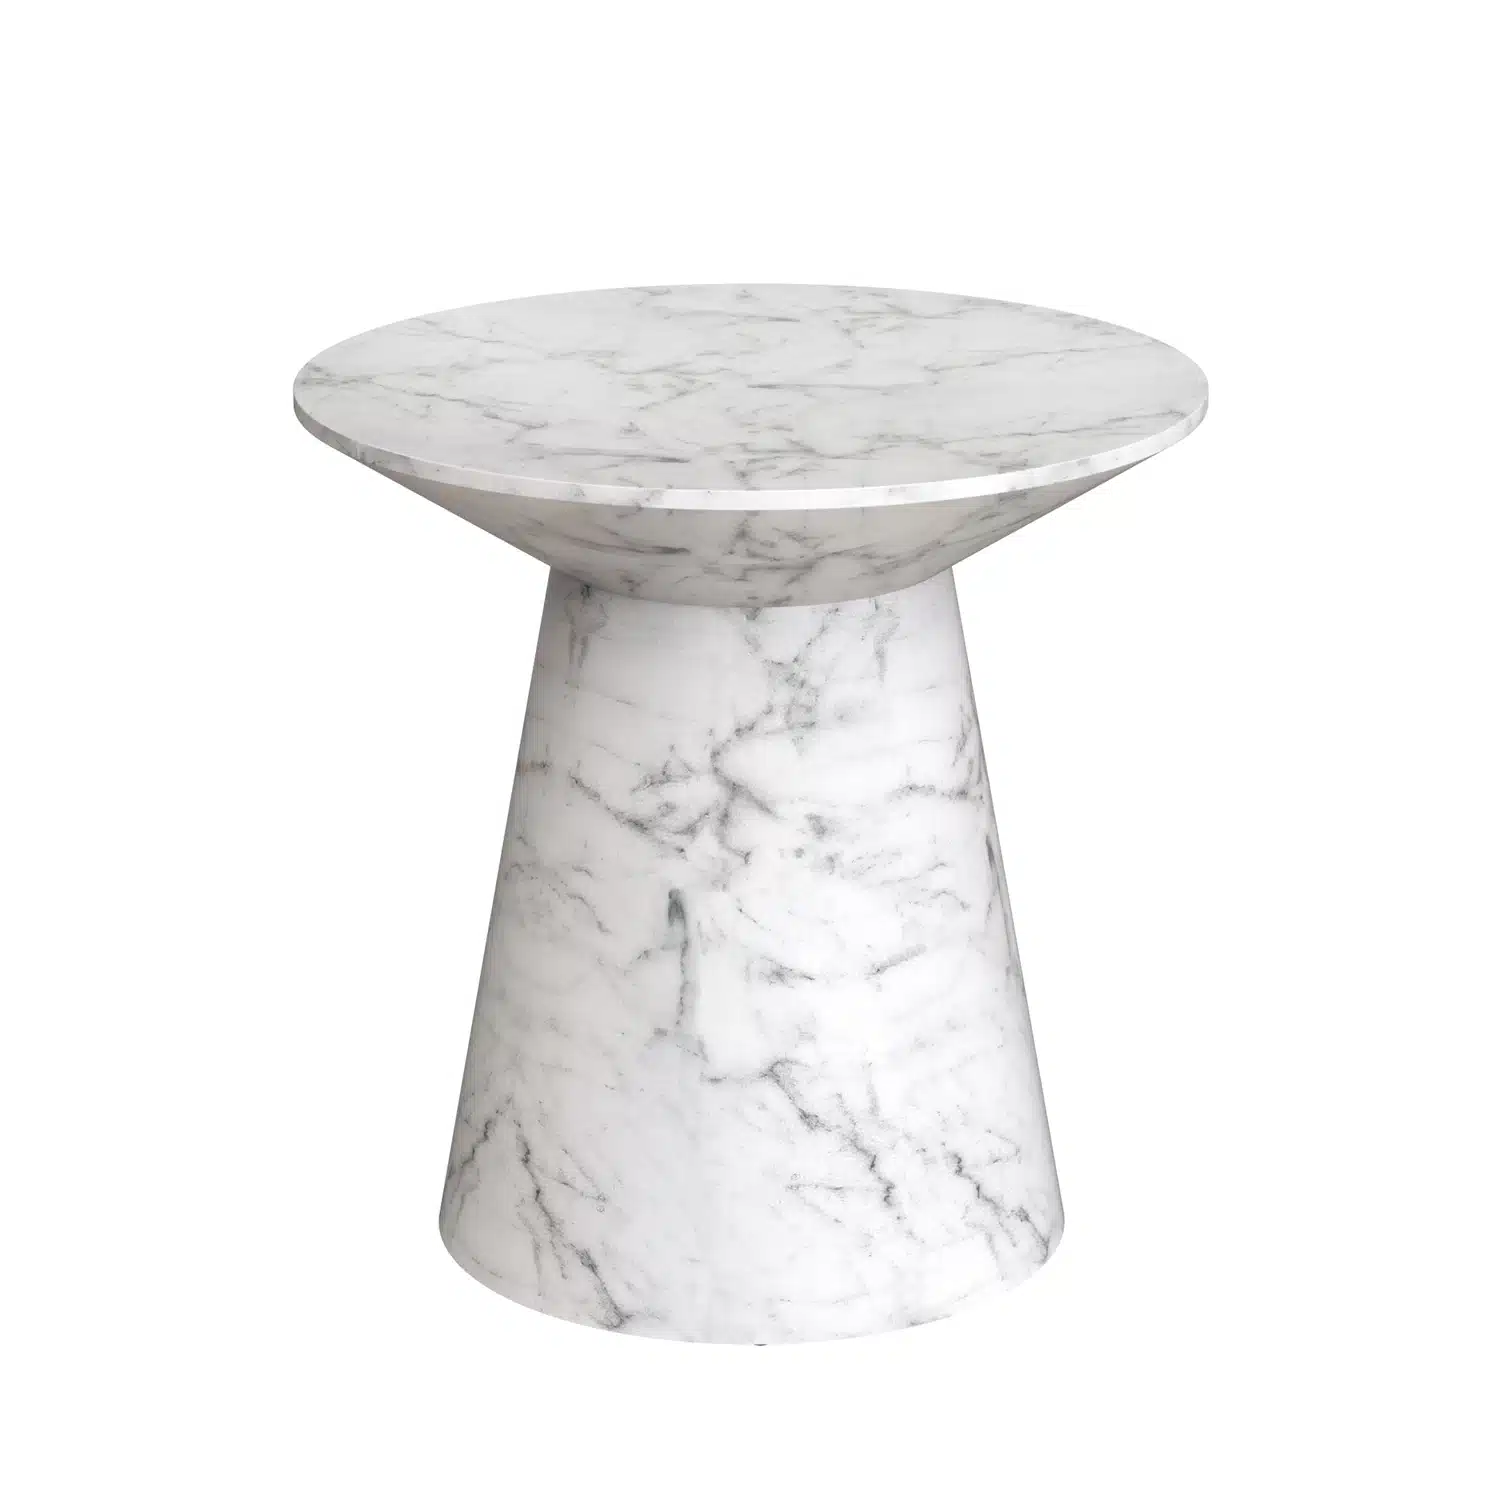 MUSHROOM-ROUND-SIDE-TABLE-D50xH50CM-Marble-(2)_result